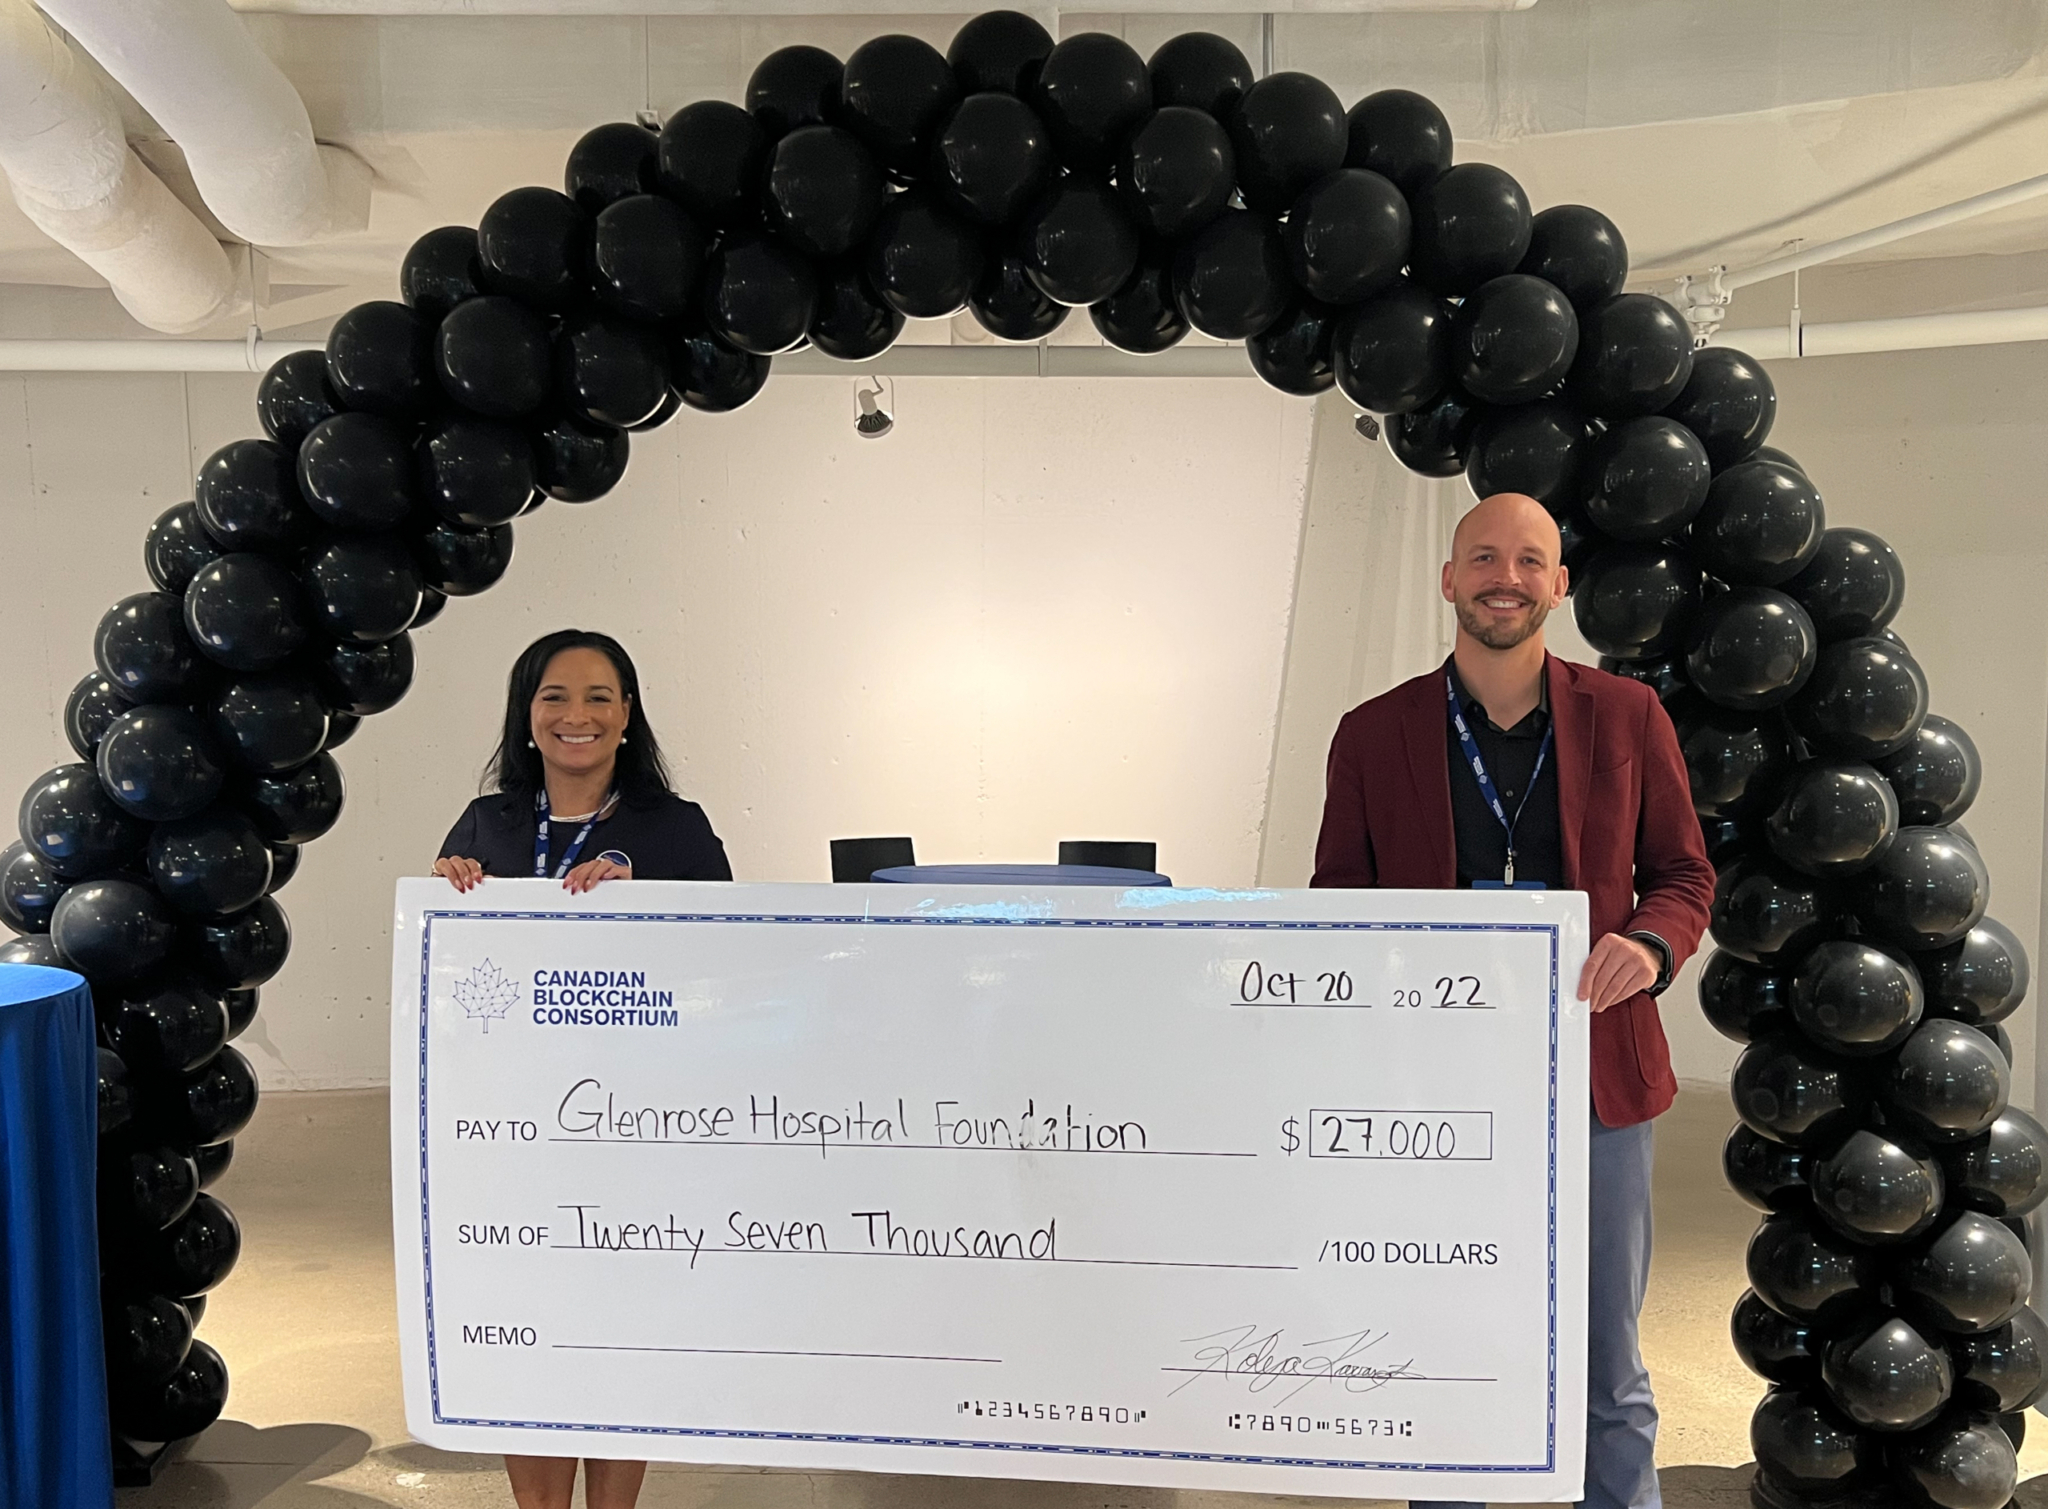 Photo of a man and woman standing with an oversized cheque, made out to the Glenrose Hospital Foundation in the amount of $27,000